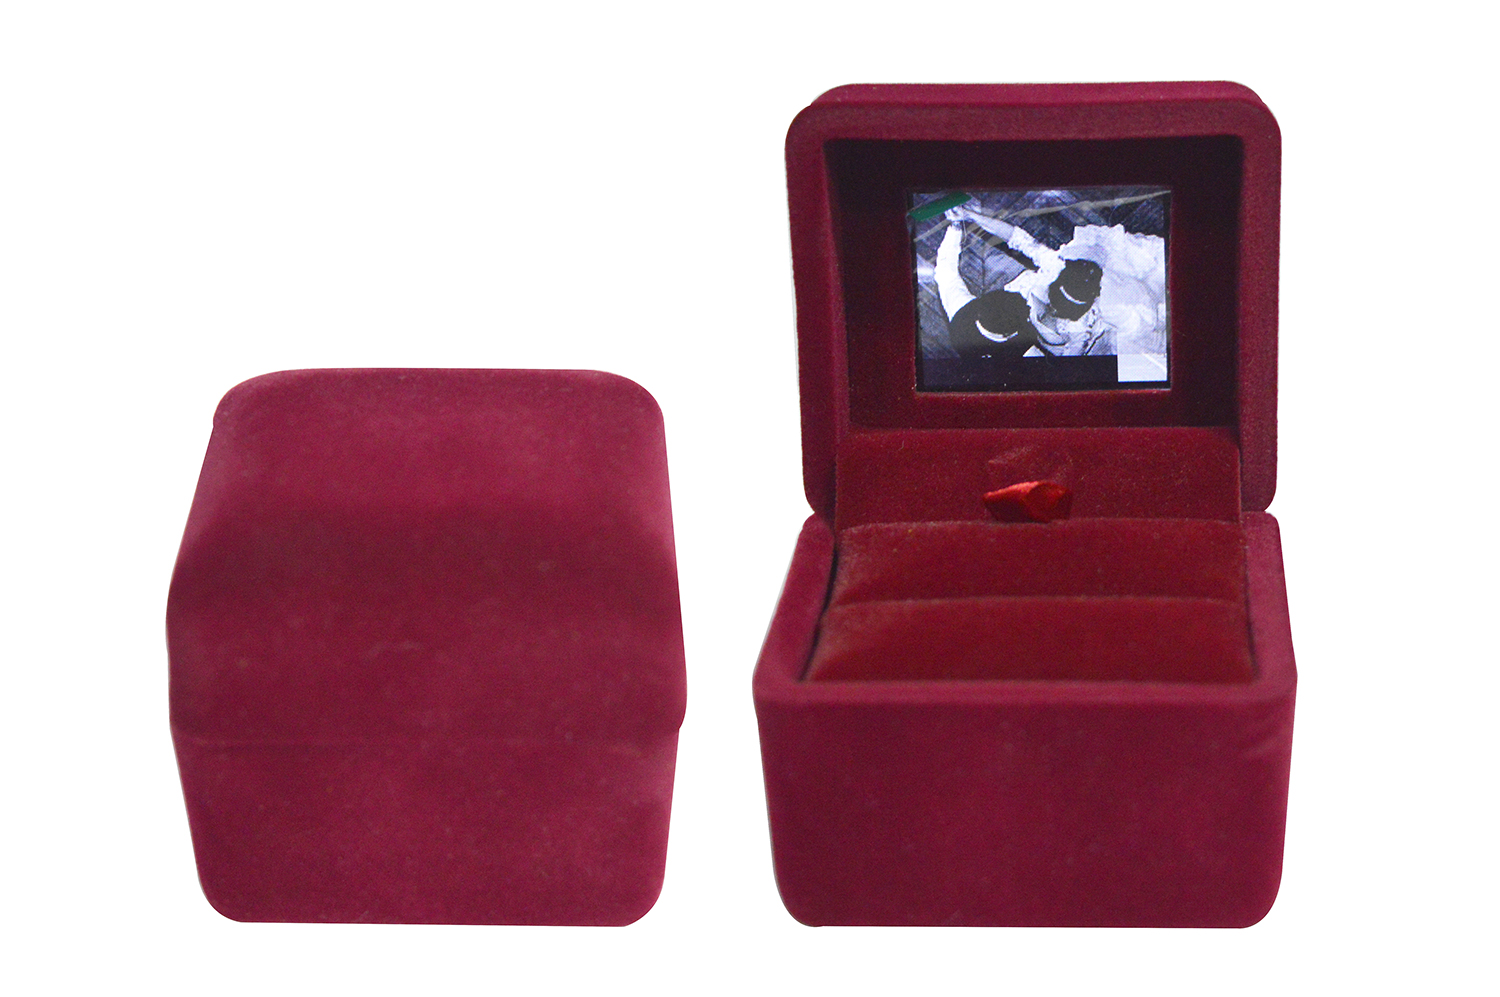 LCD Jewellery Boxes